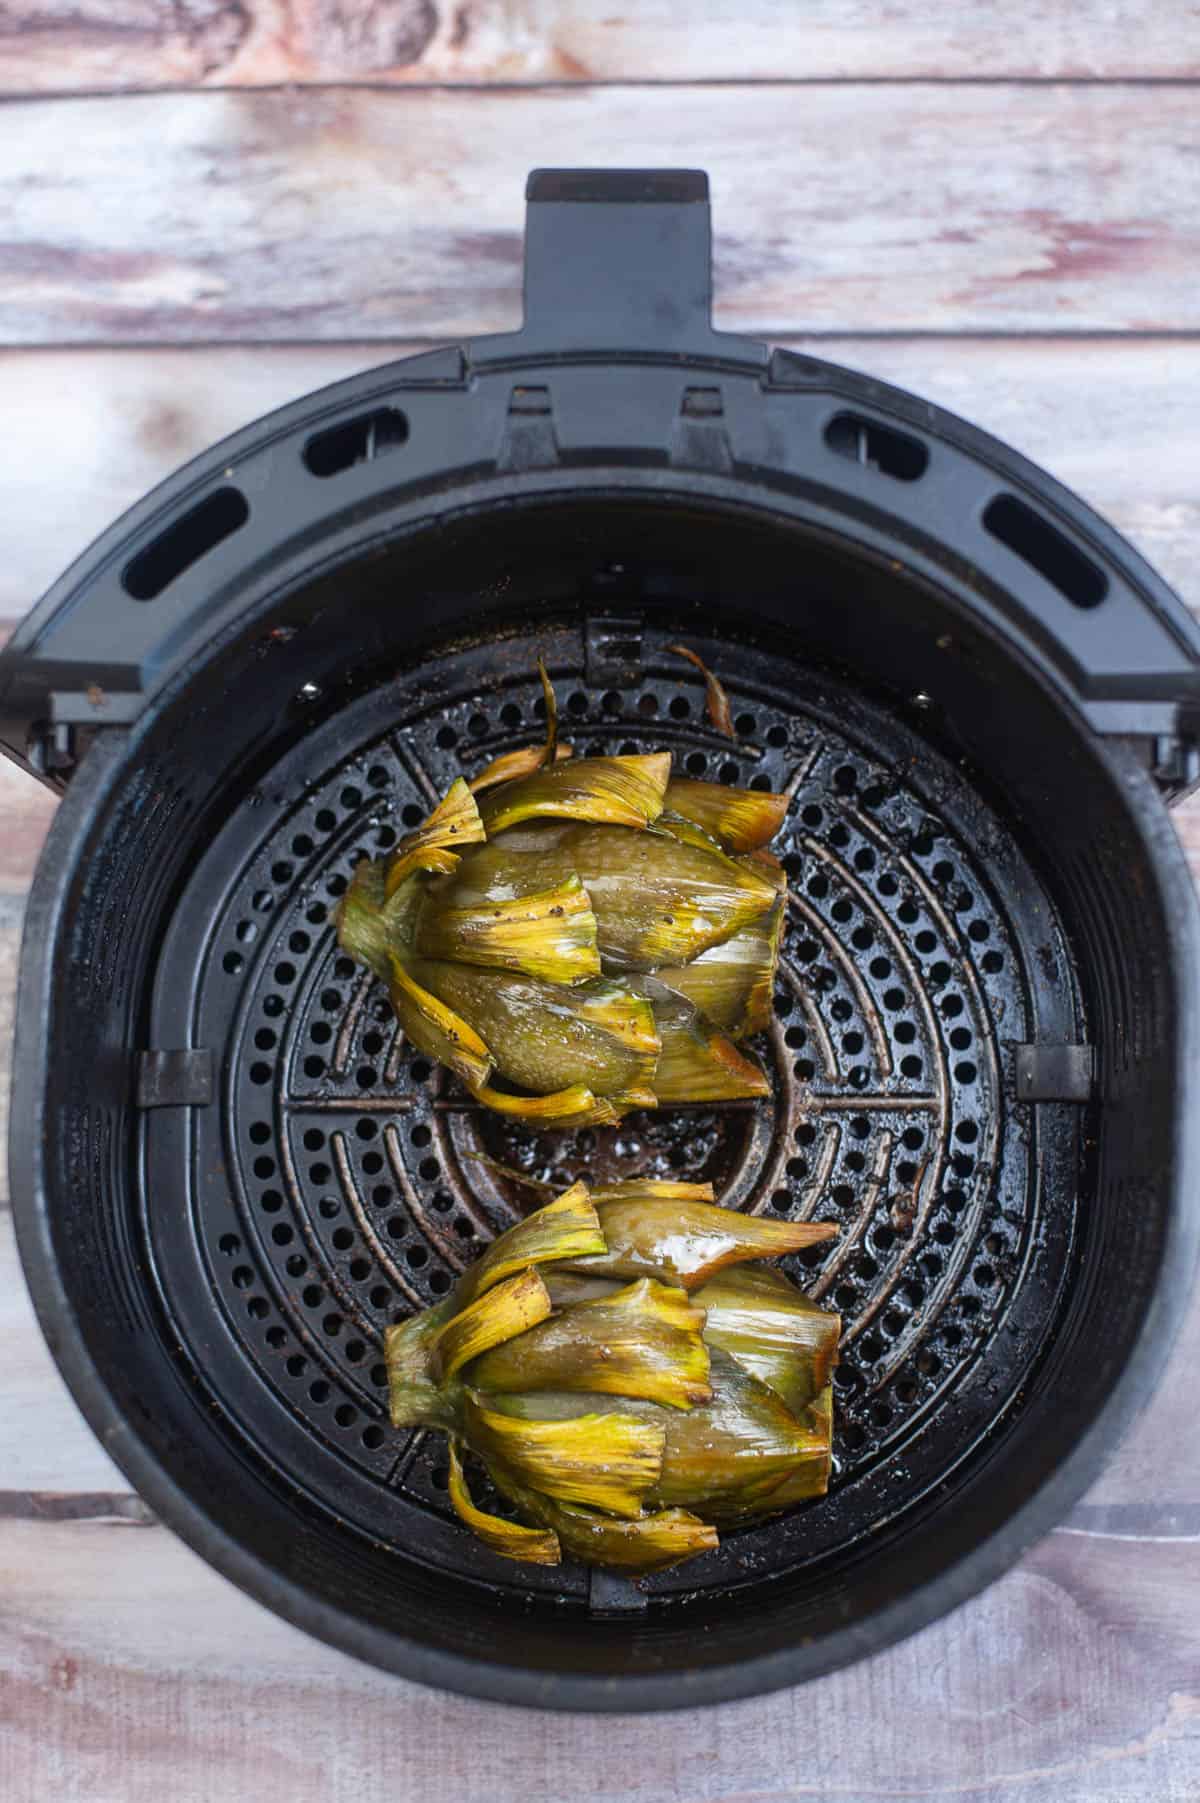 Artichokes cooked in an air fryer on a wooden table.